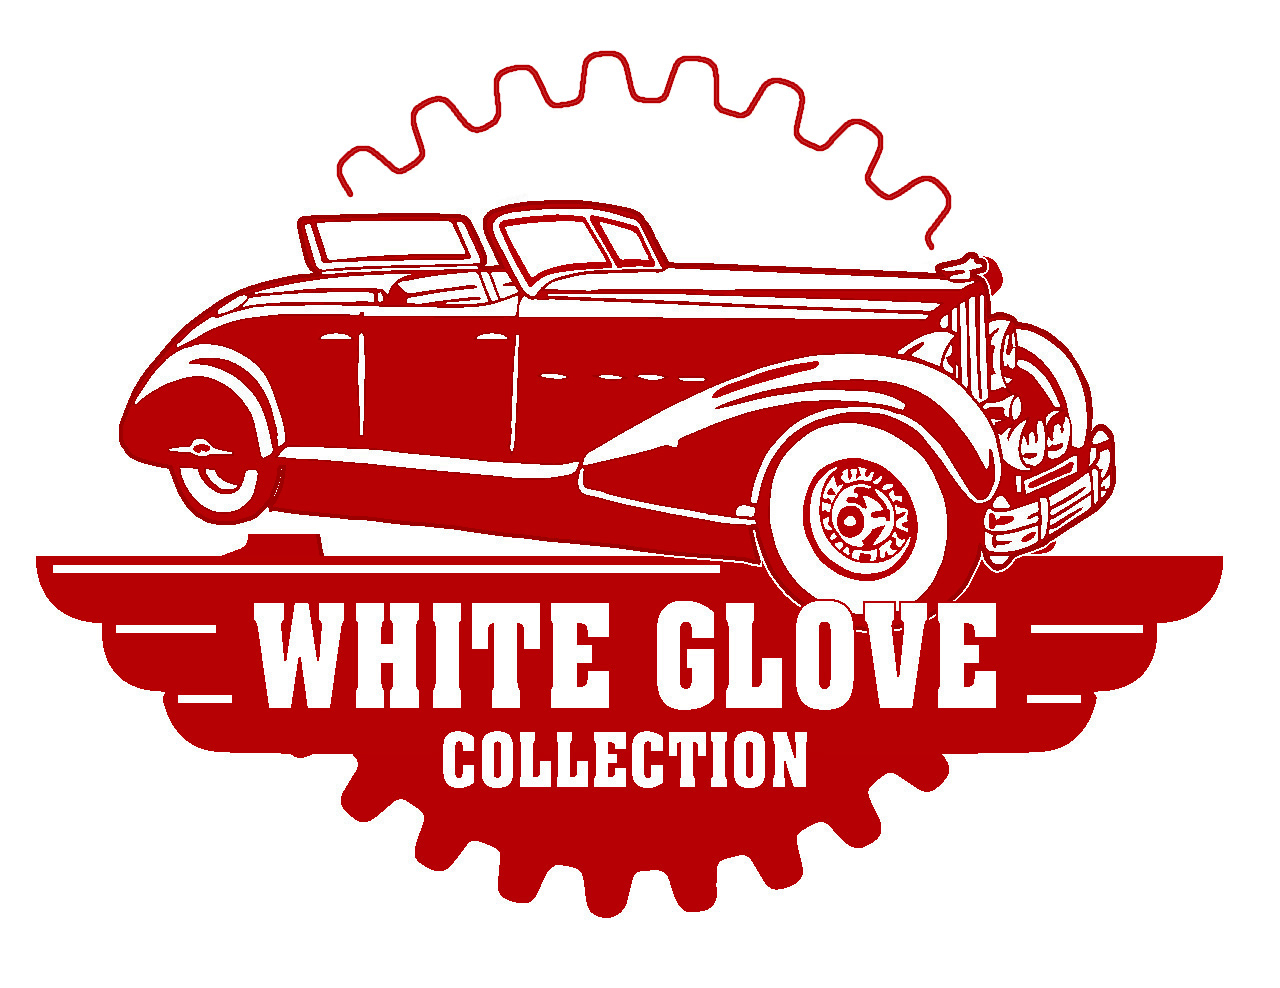 White Glove Collection